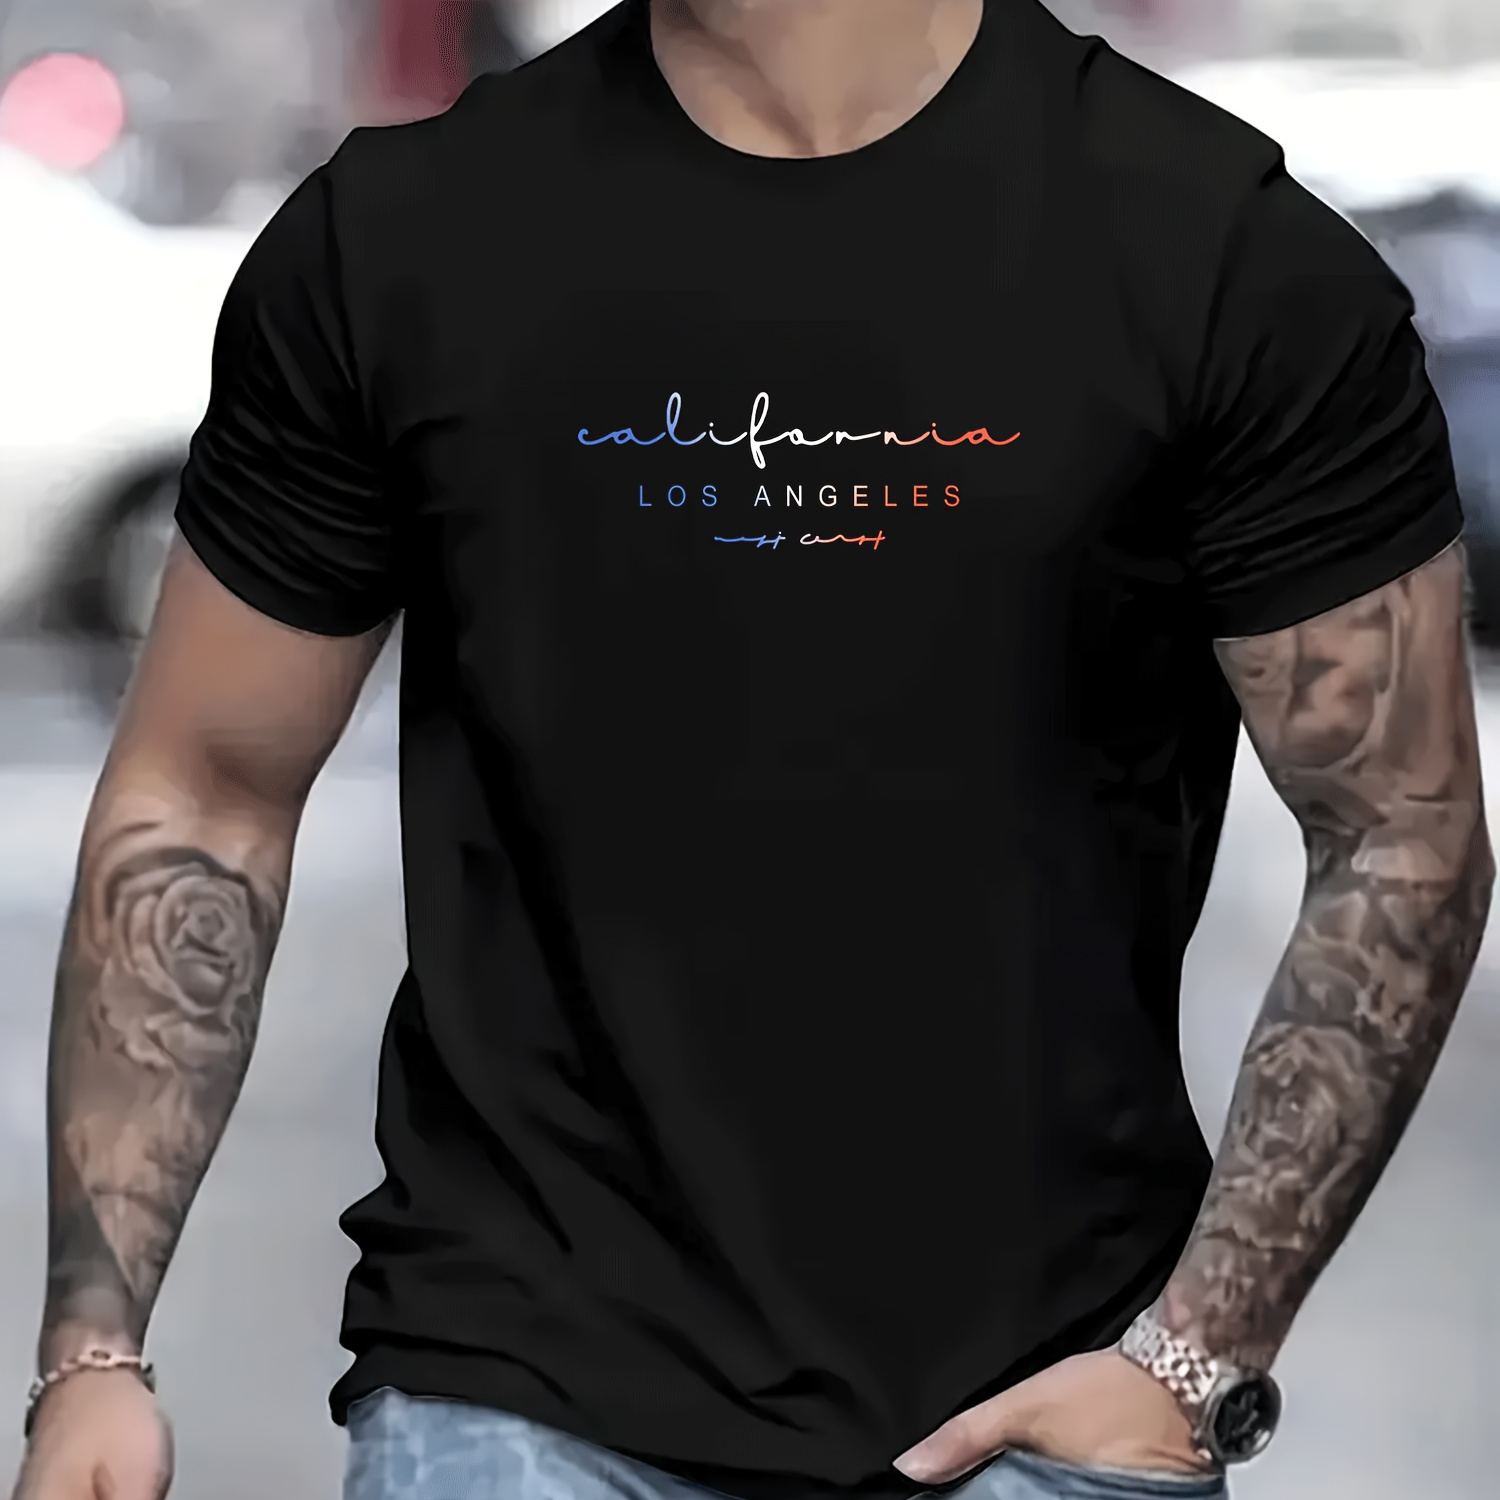 

los Angeles" Print T-shirt, Men's Casual Street Style Stretch Round Neck Tee Shirt For Summer